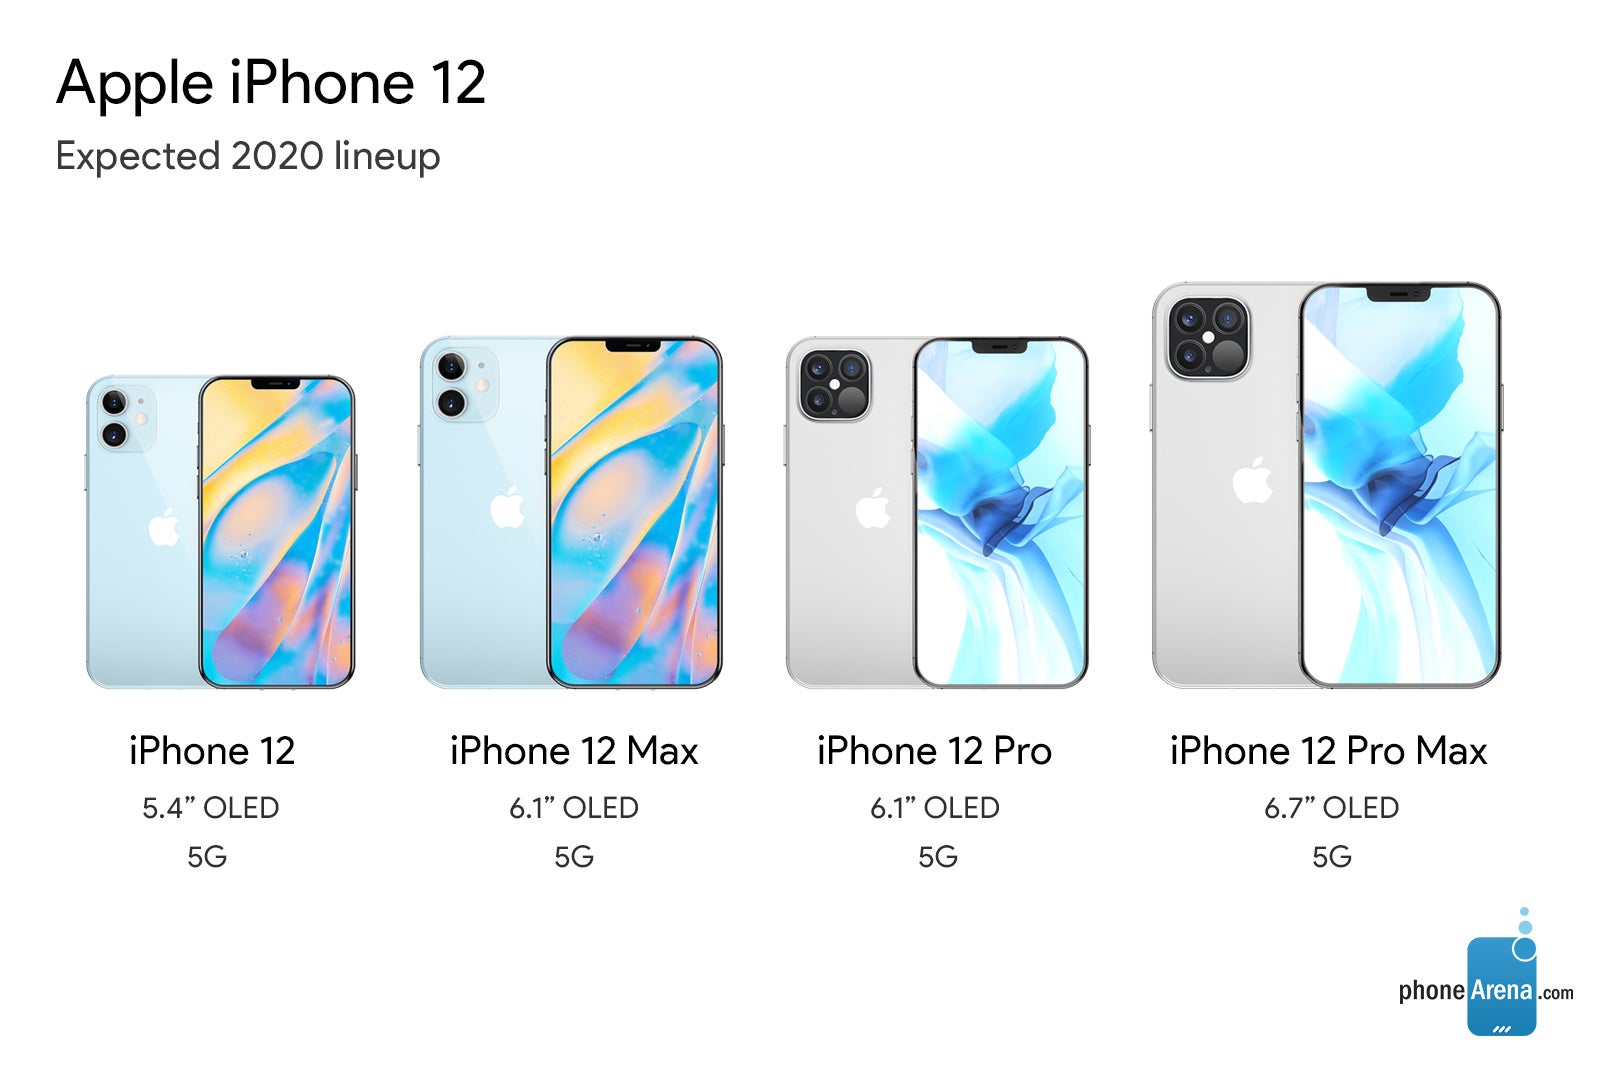 iPhone 12 series concept render - Apple&#039;s launch plans get detailed: iPad Air 4, iPhone 12 5G, AirPods Studio, much more